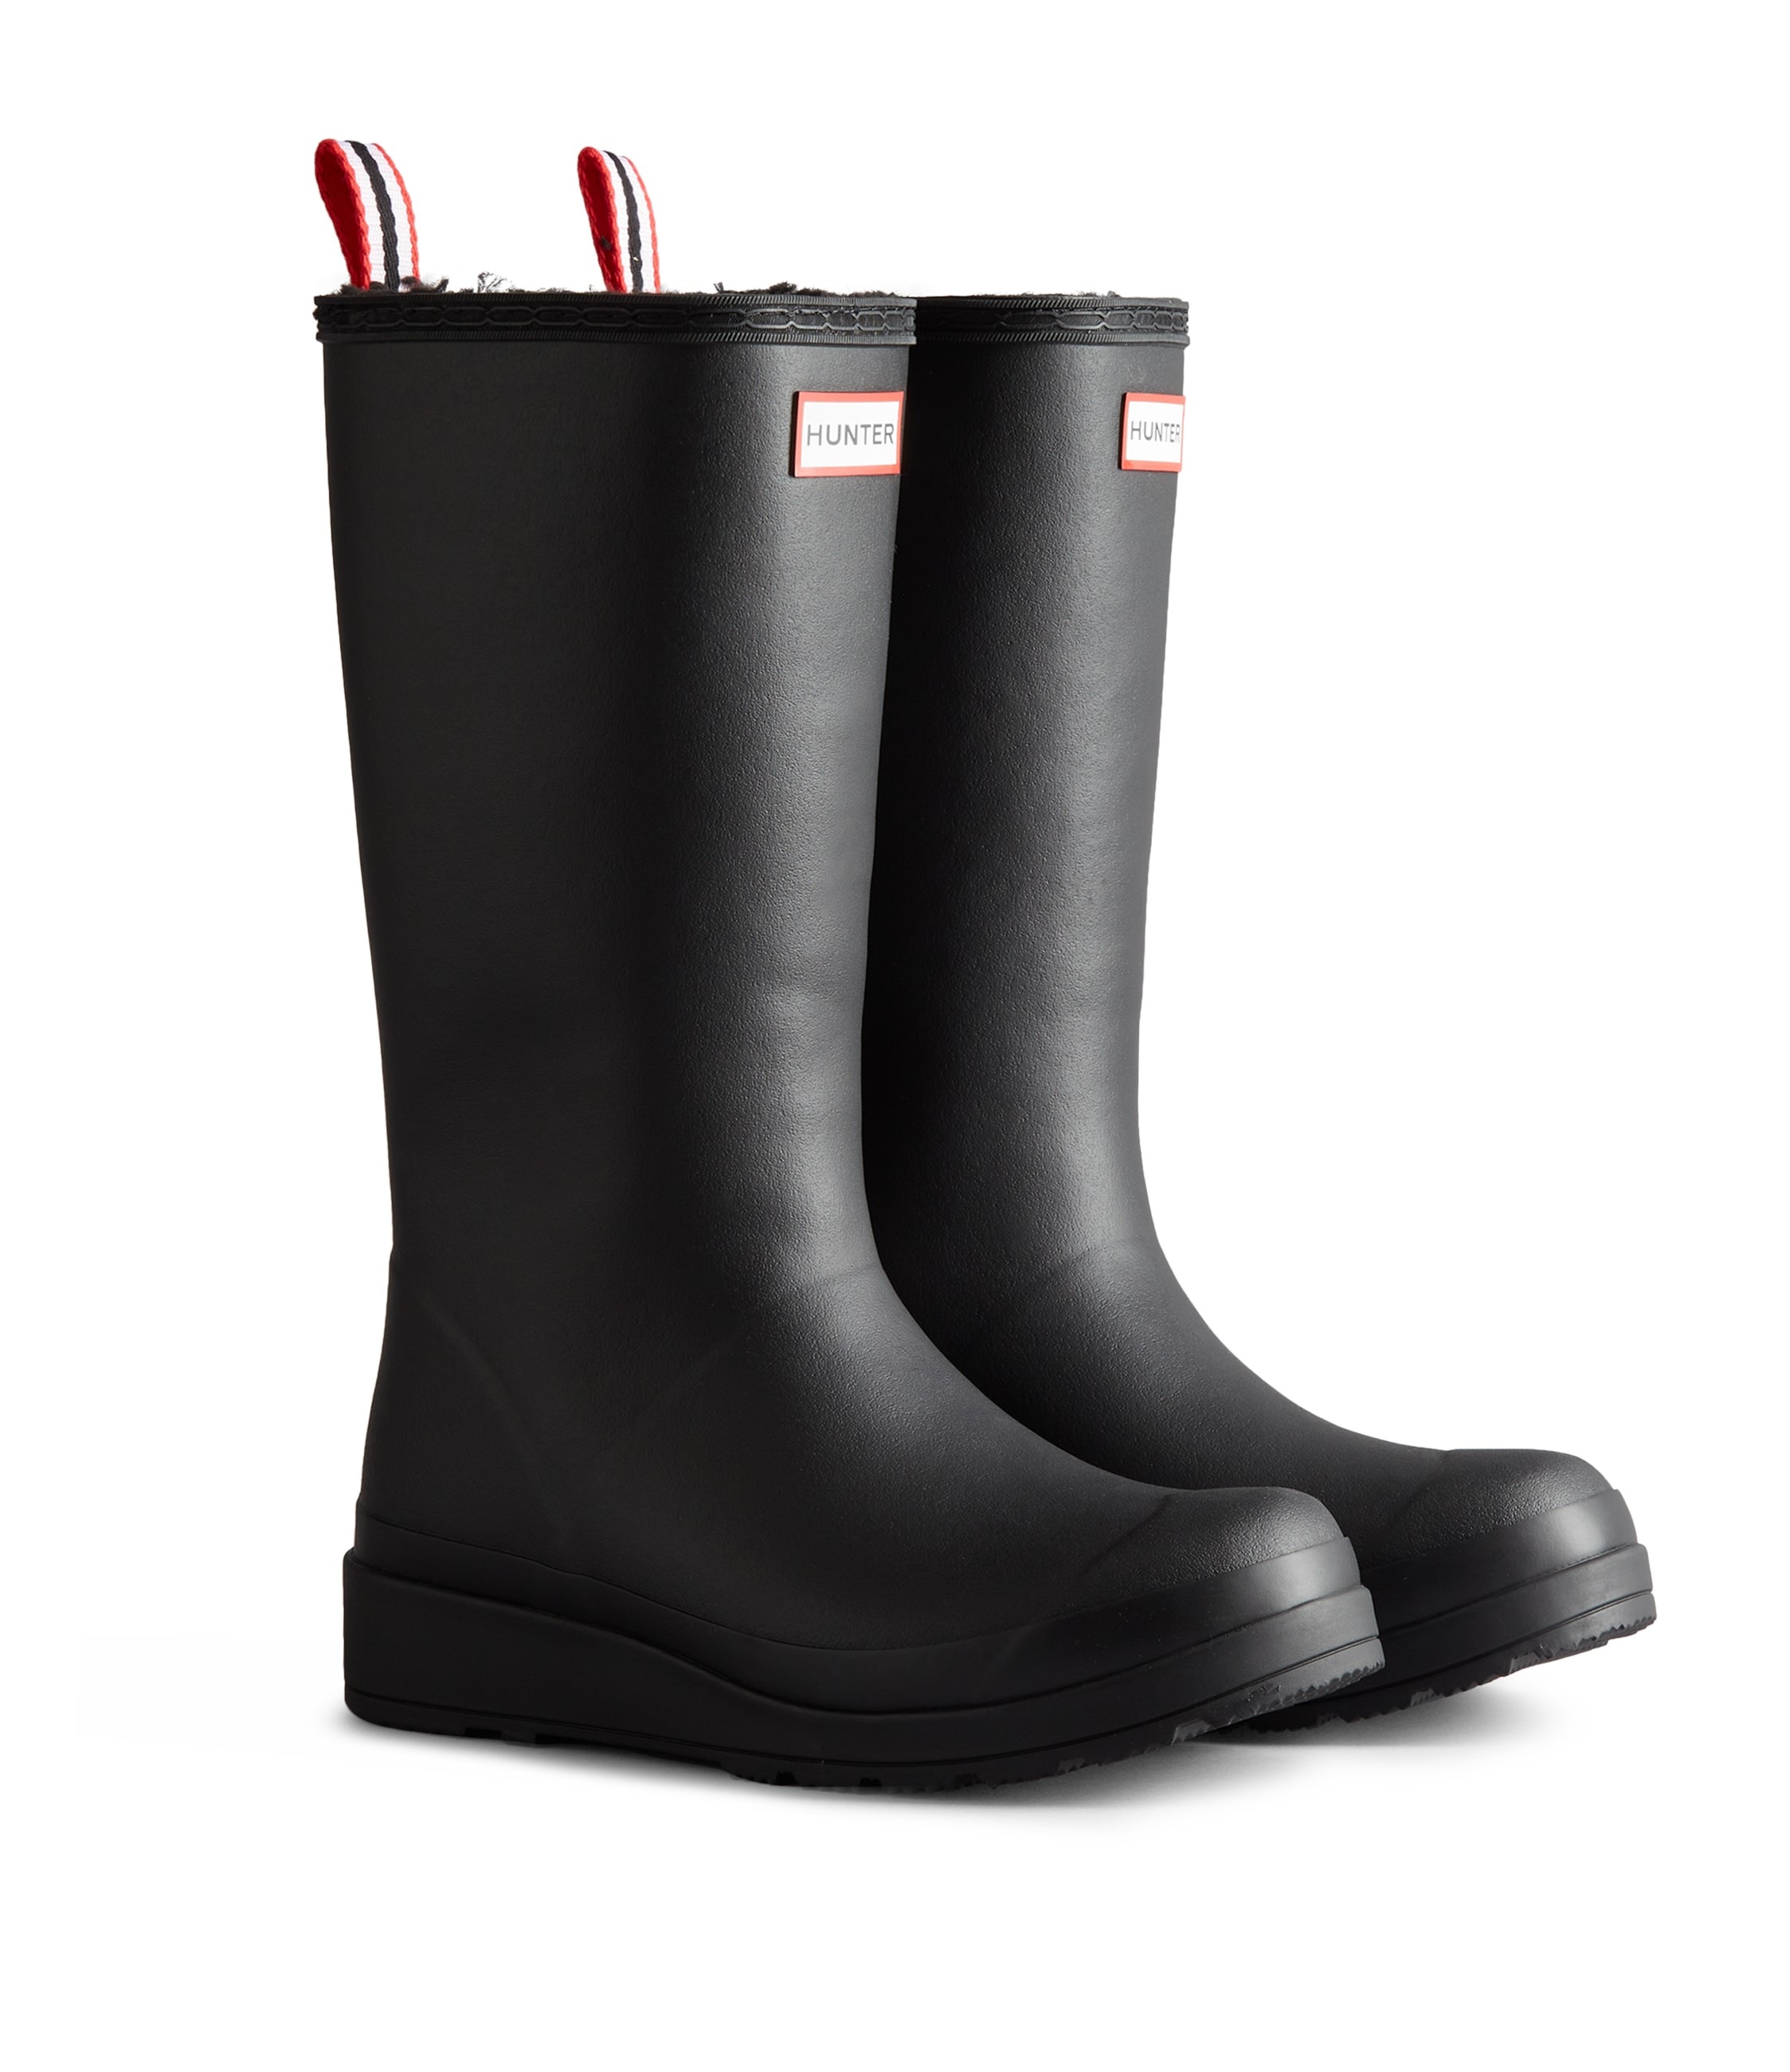 WOMENS PLAY TALL SHERPA INSULATED BOOT|HUNTER(ハンター)の通販